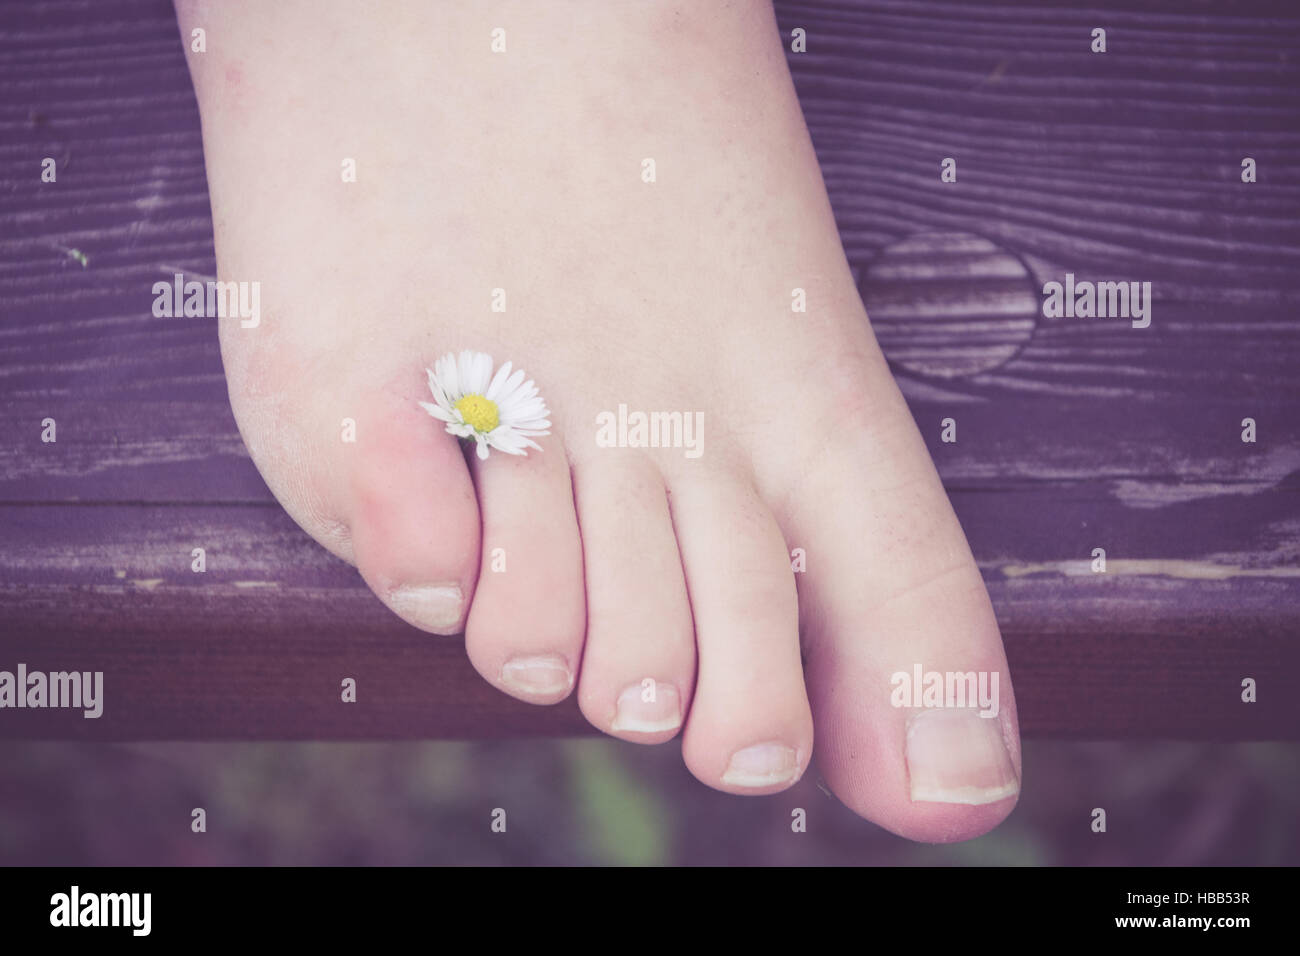 Barefoot with flower Stock Photo